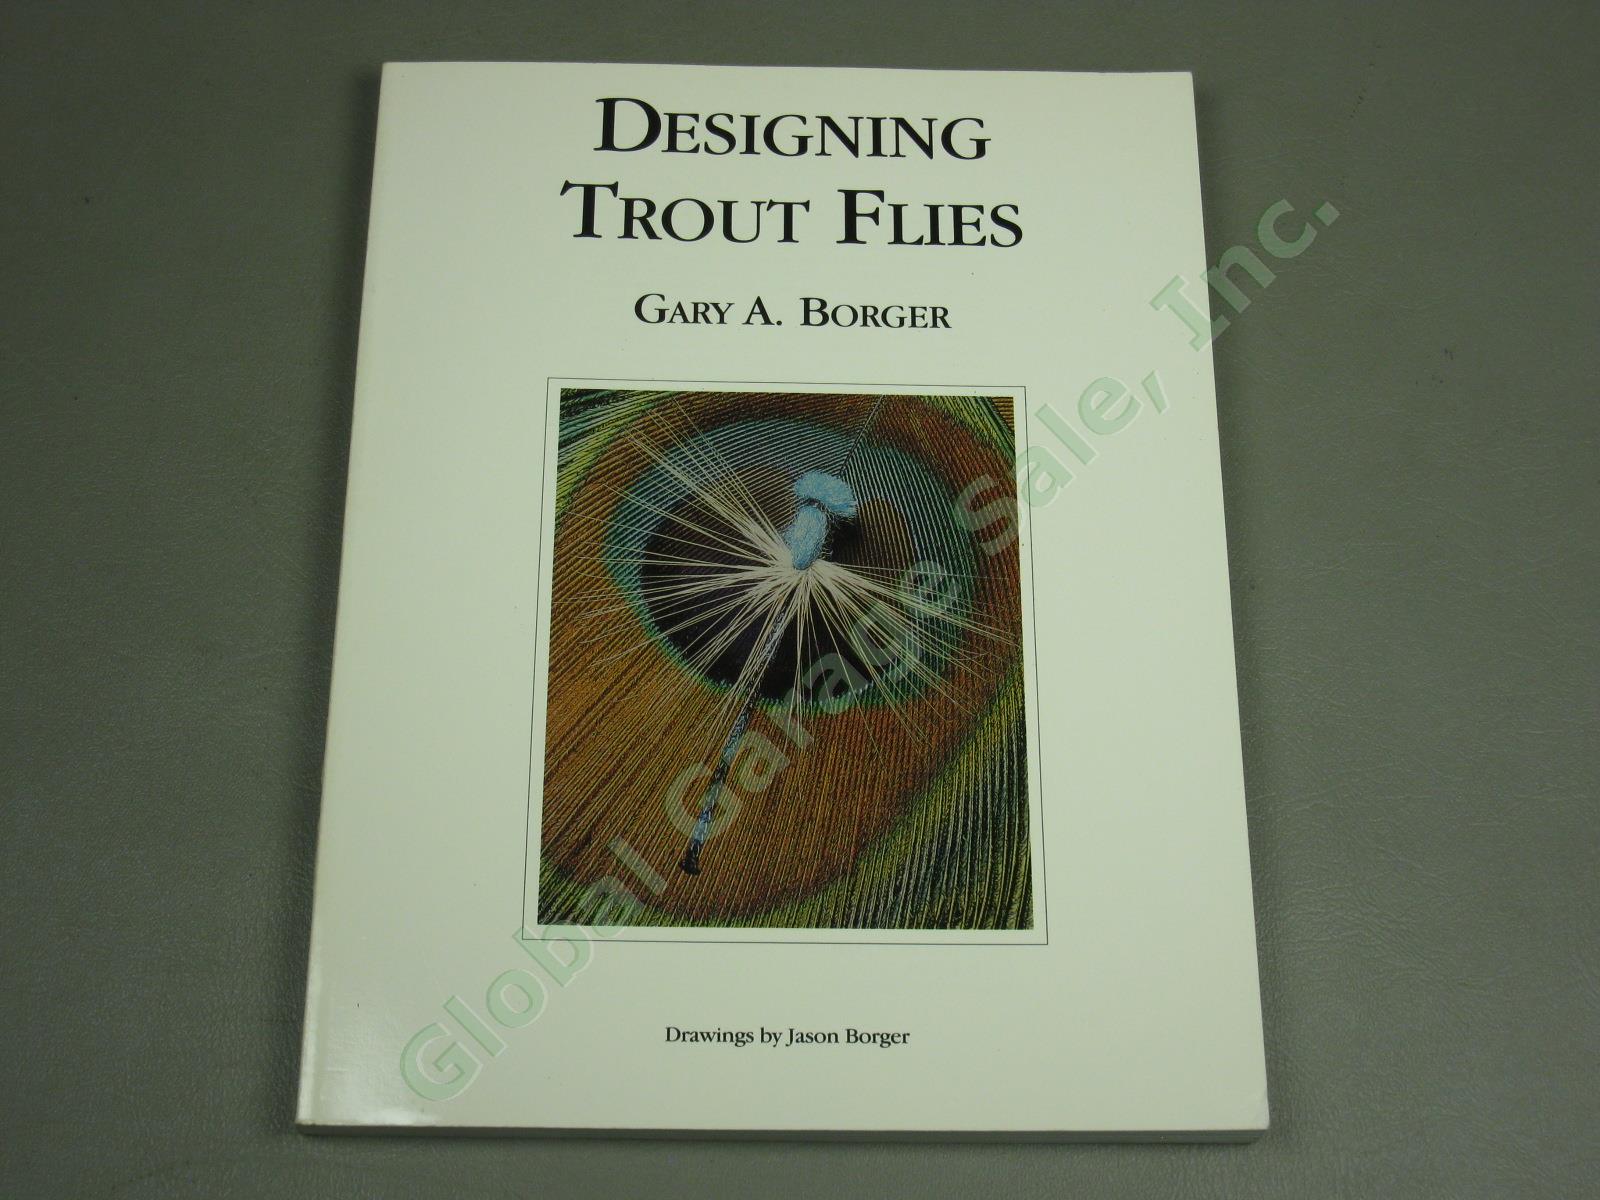 19 Fly Tying Manuals Fishing Books Lot Trout Flies Nymphs Tricos Emergers HC+ NR 18